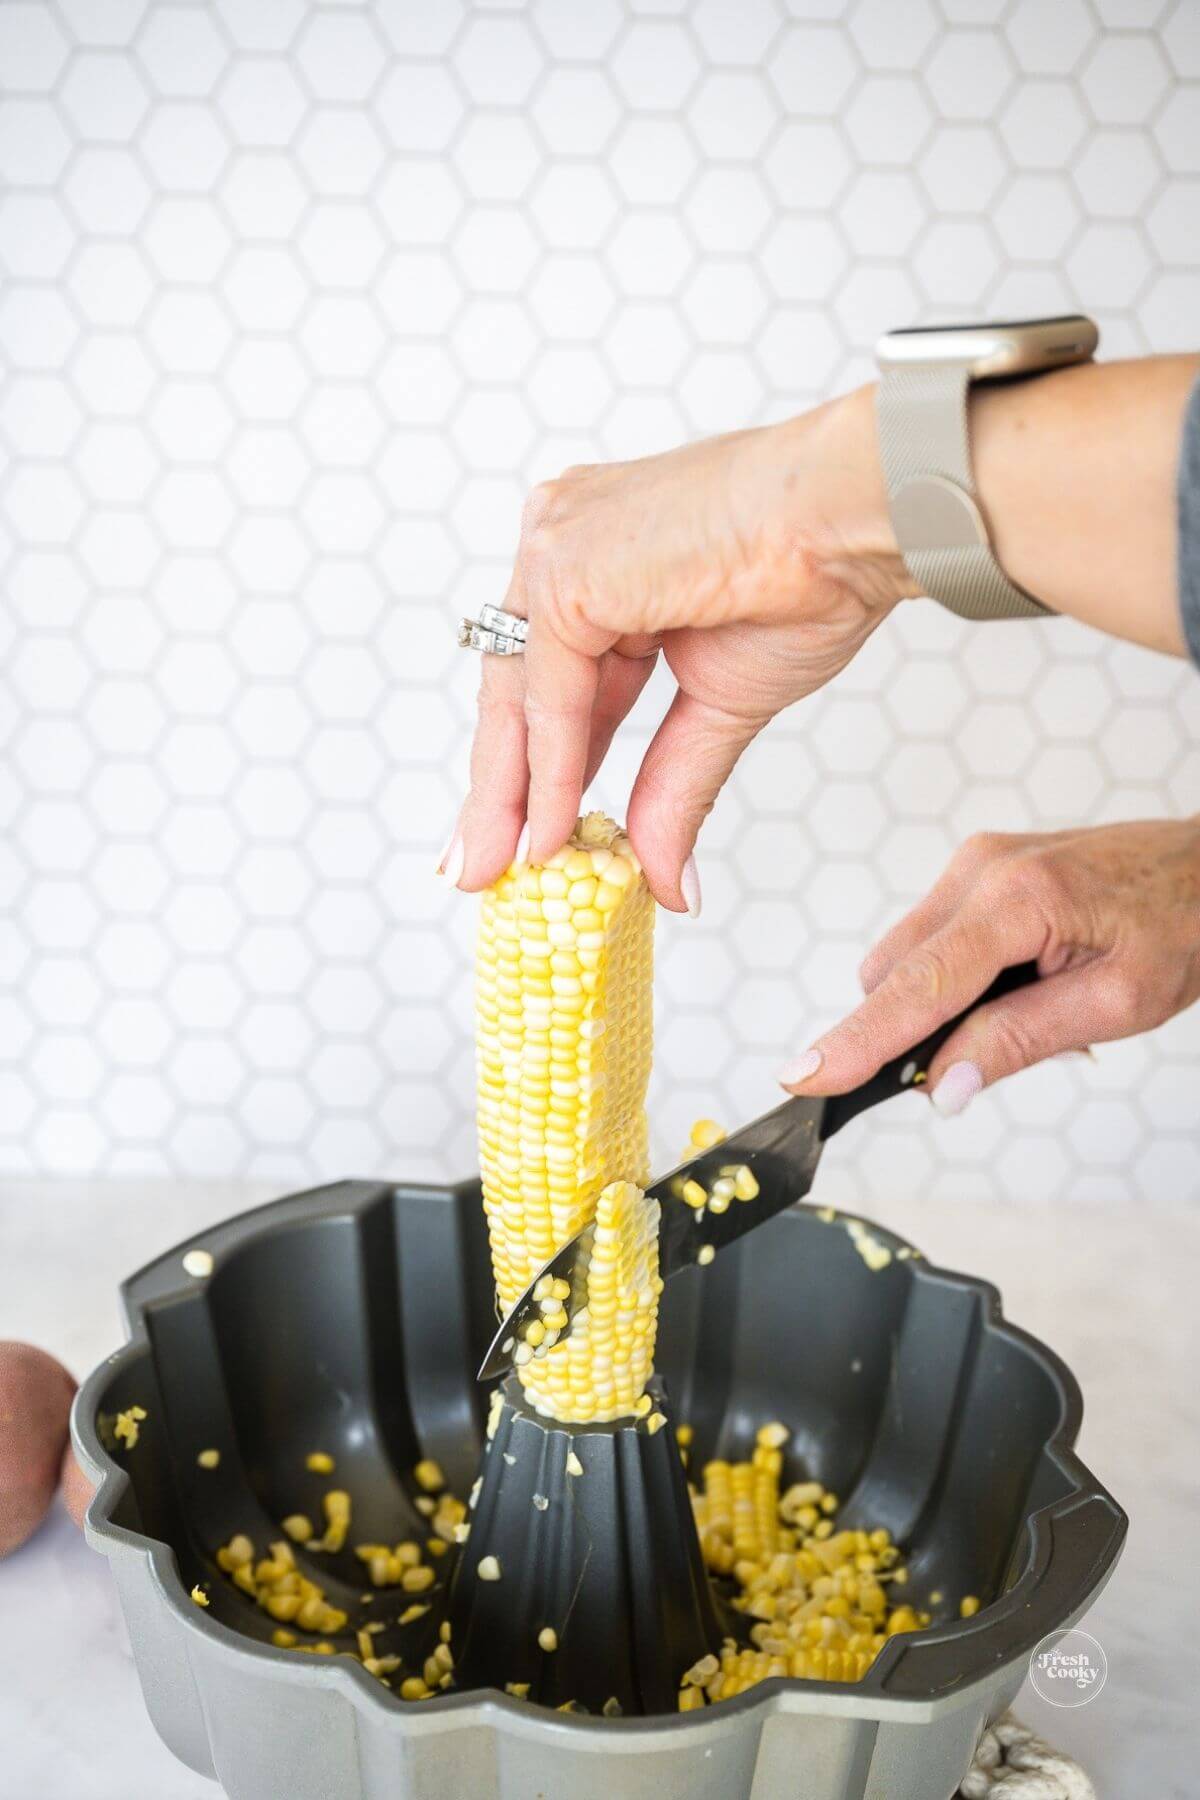 Showing how to cut corn off the cobb without making a big mess.